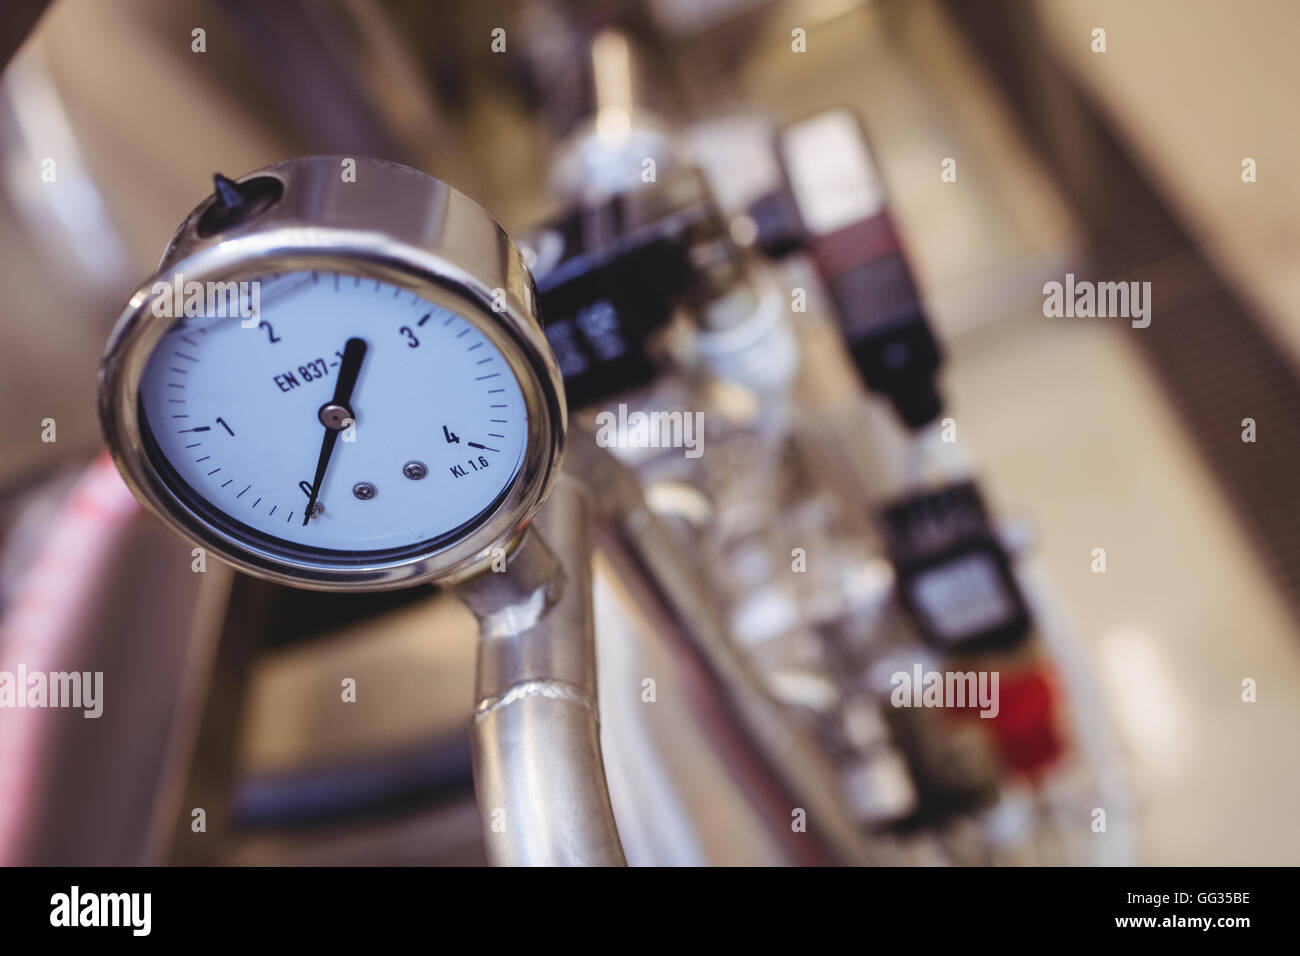 High angle view of pressure gauge Stock Photo